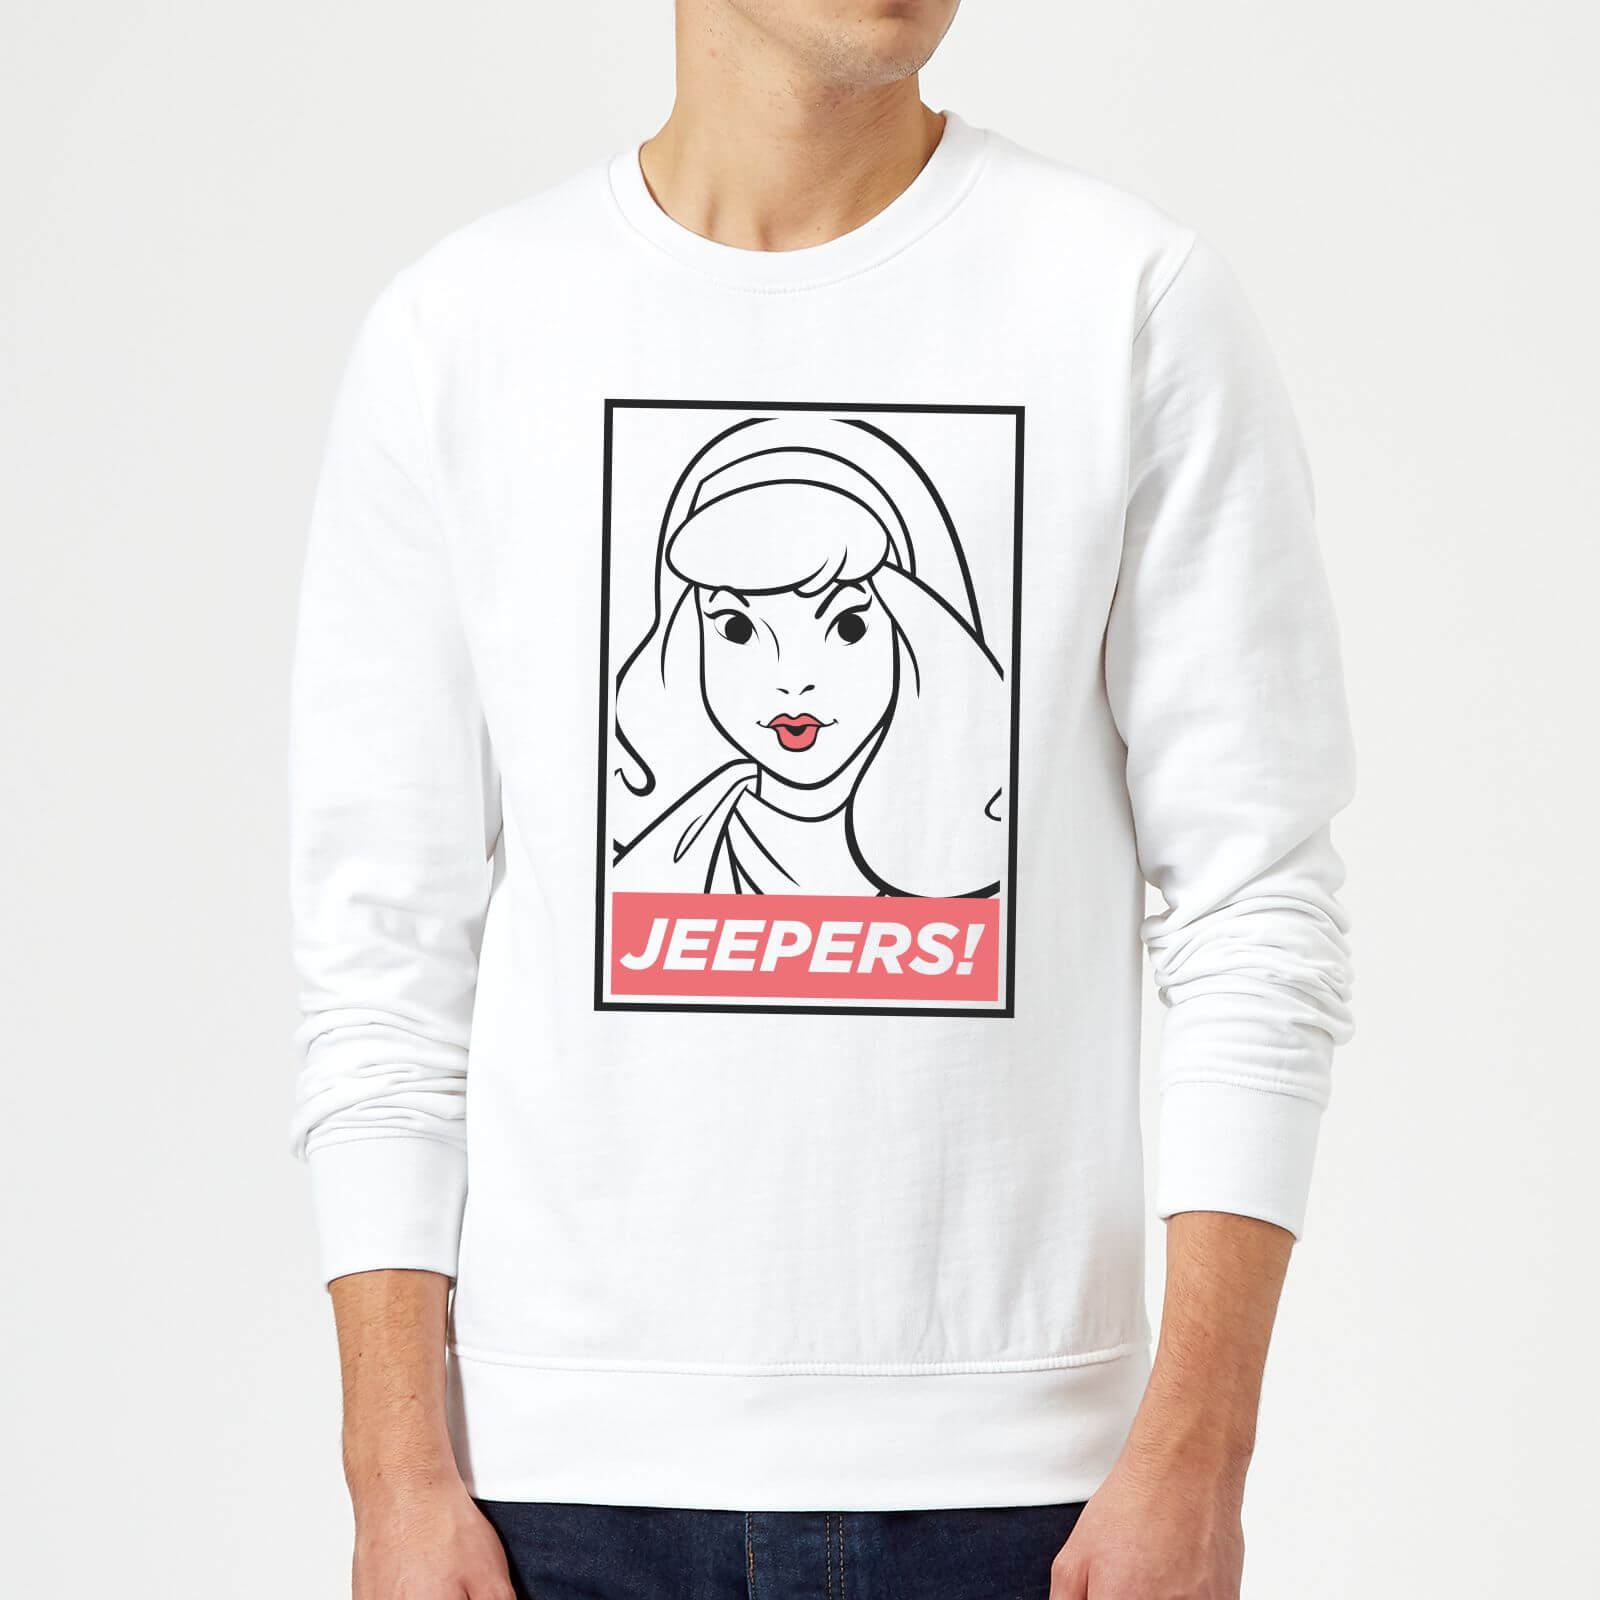 Scooby Doo Jeepers! Sweatshirt - White - S - White